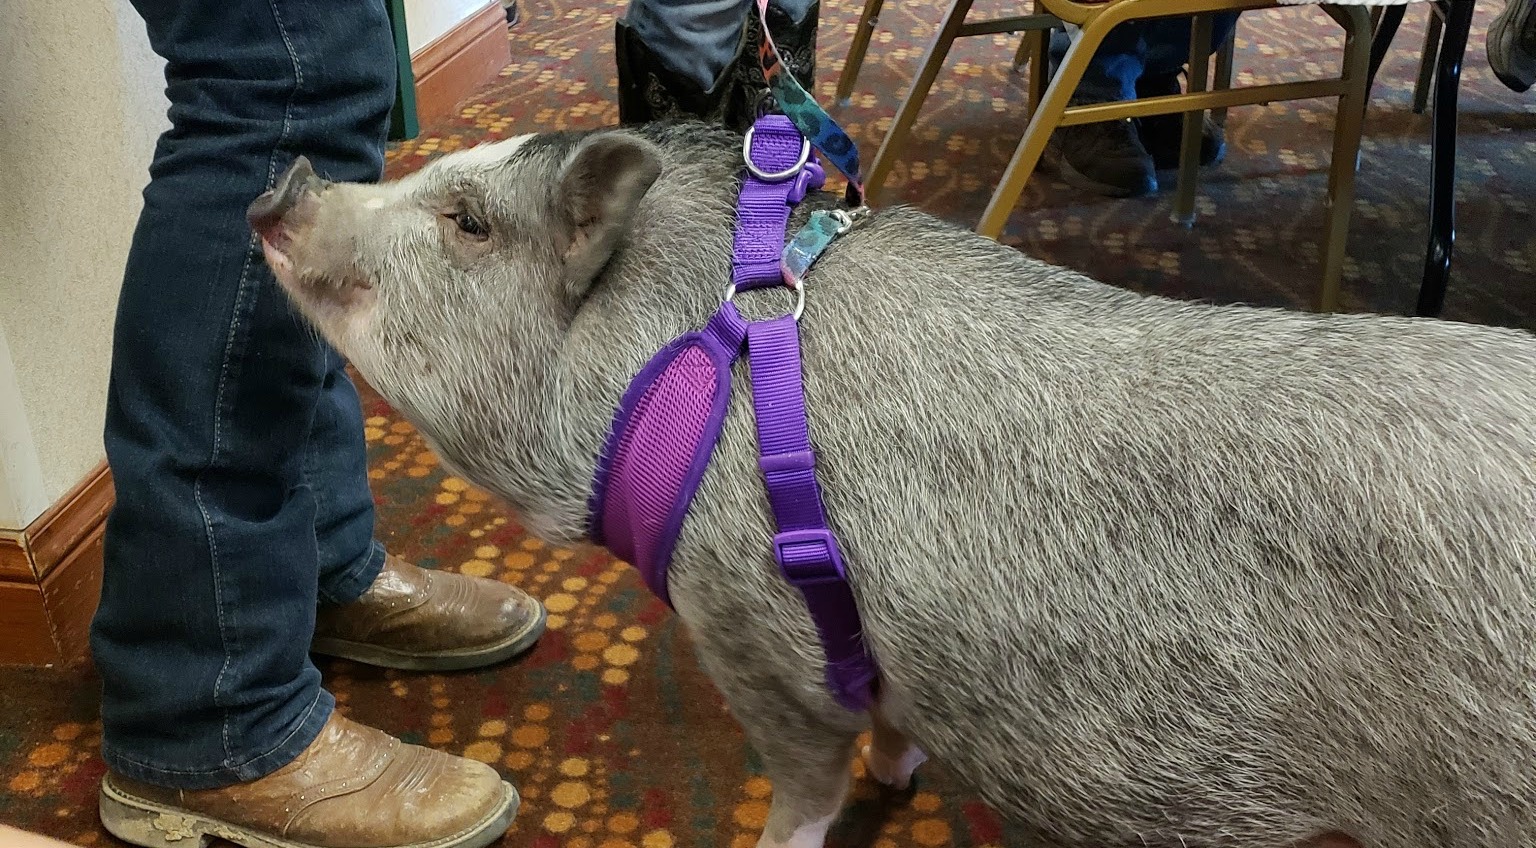 Even Bo the Pig stopped by for a visit